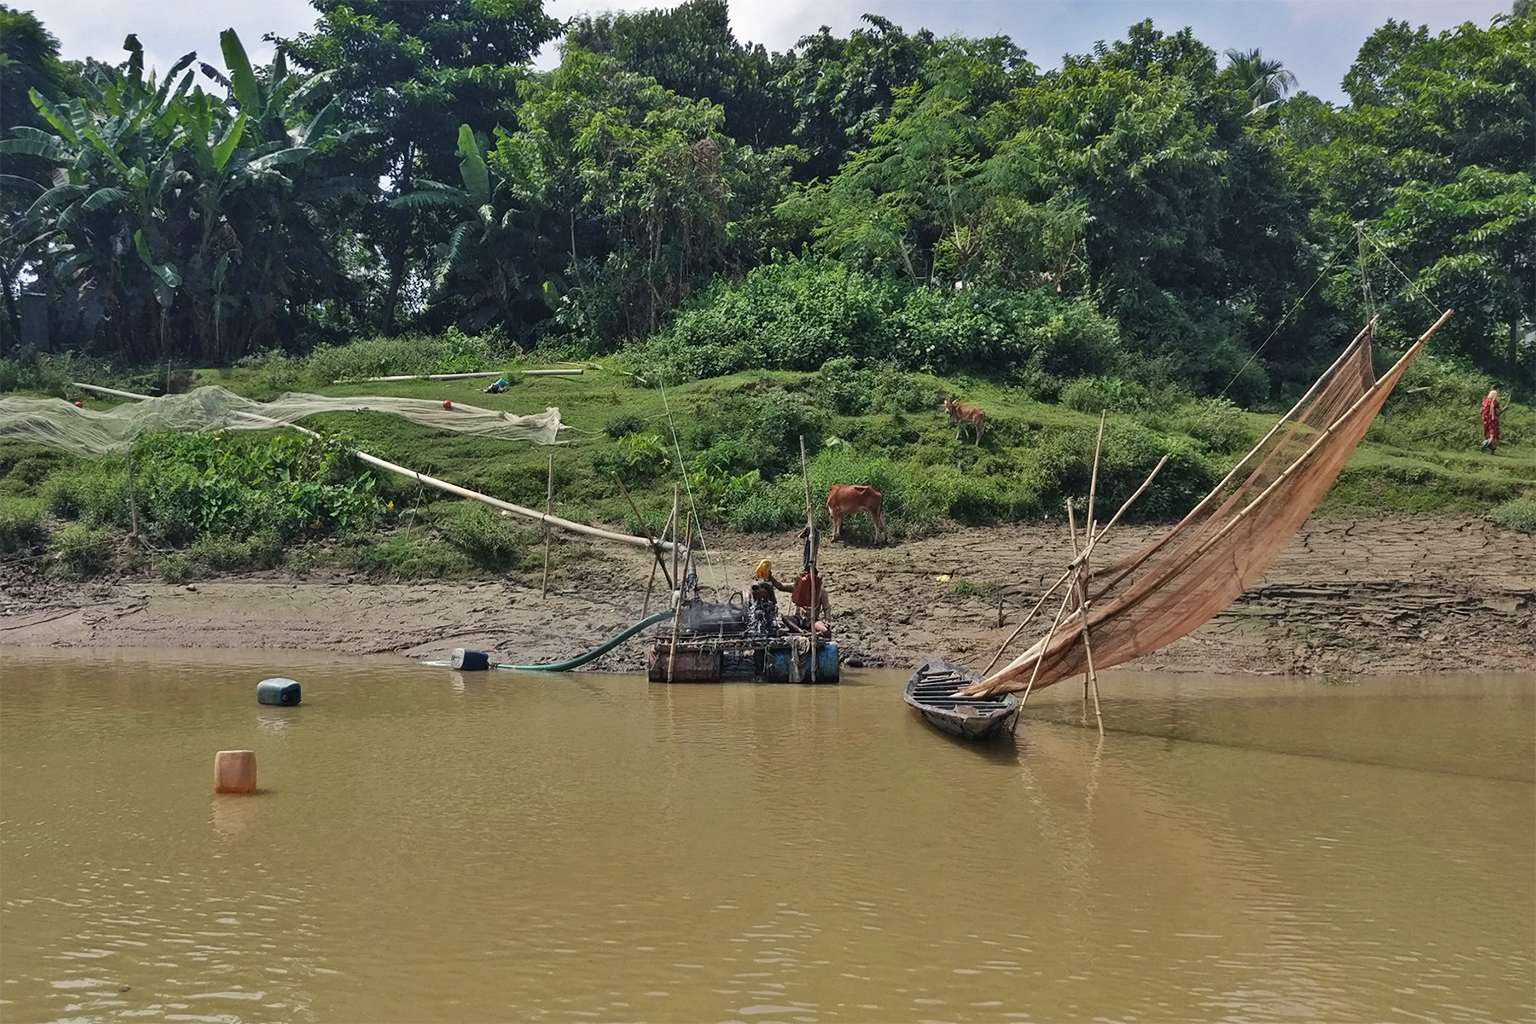 Sand mining on the riverbanks.